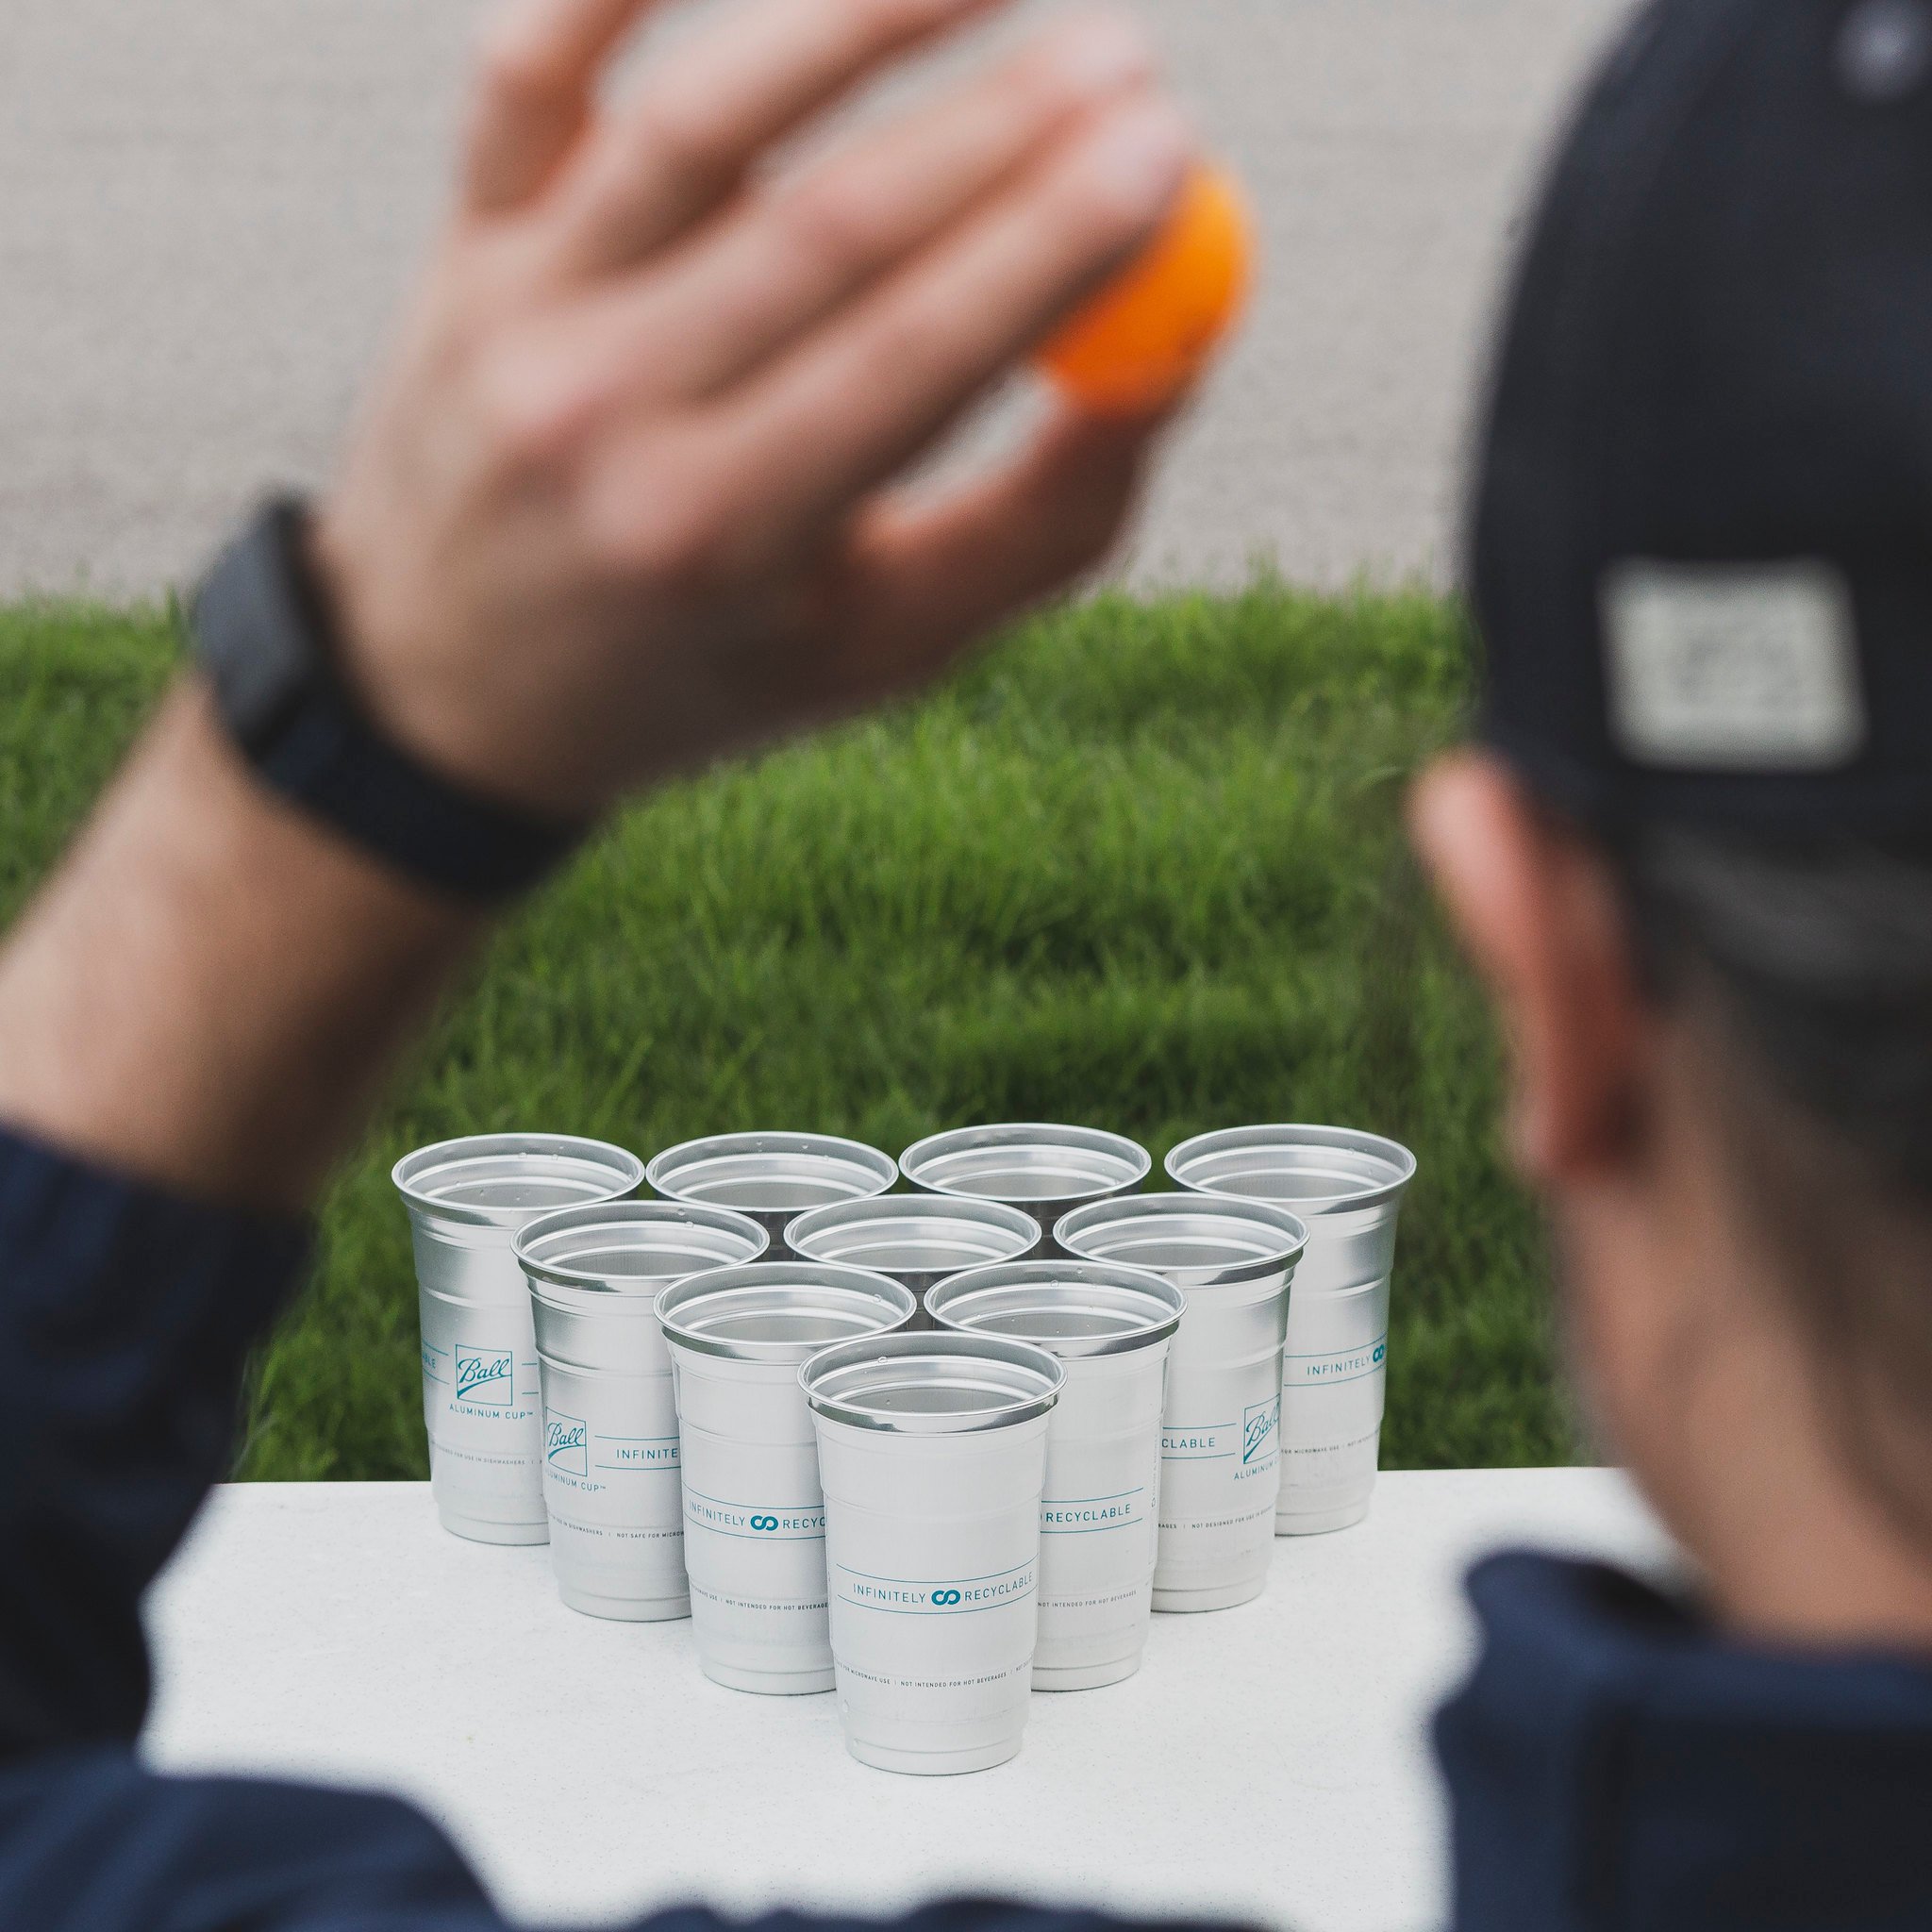 How to Play Beer Pong: Rules, Tips, & Tricks